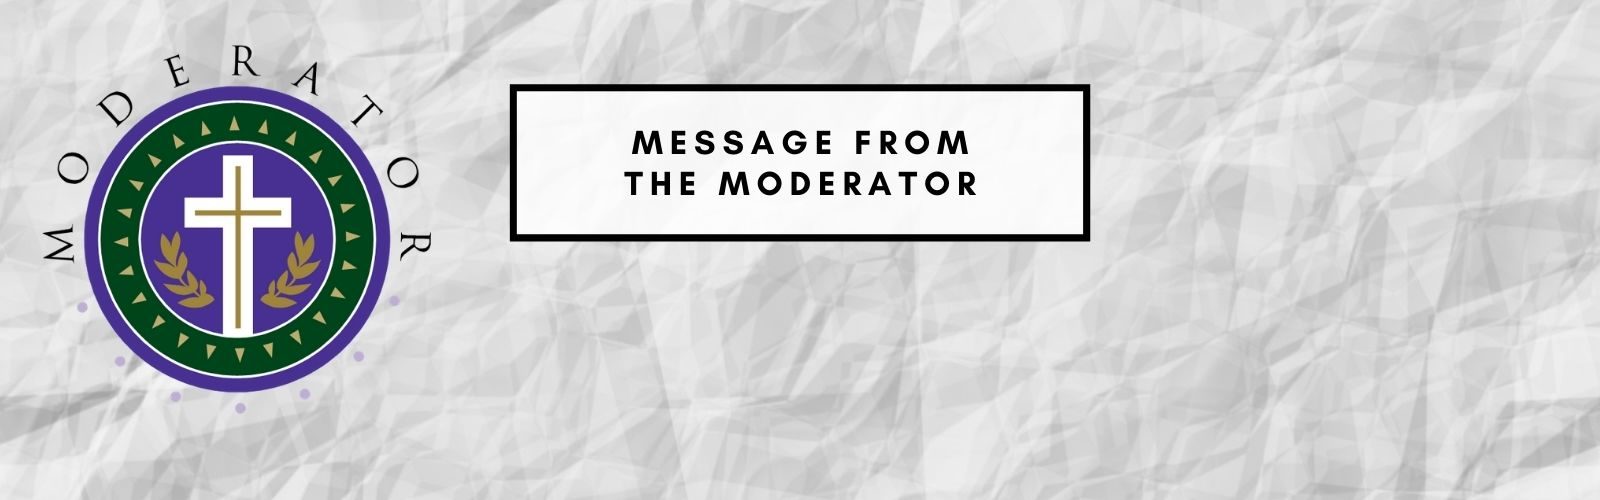 message from the moderator